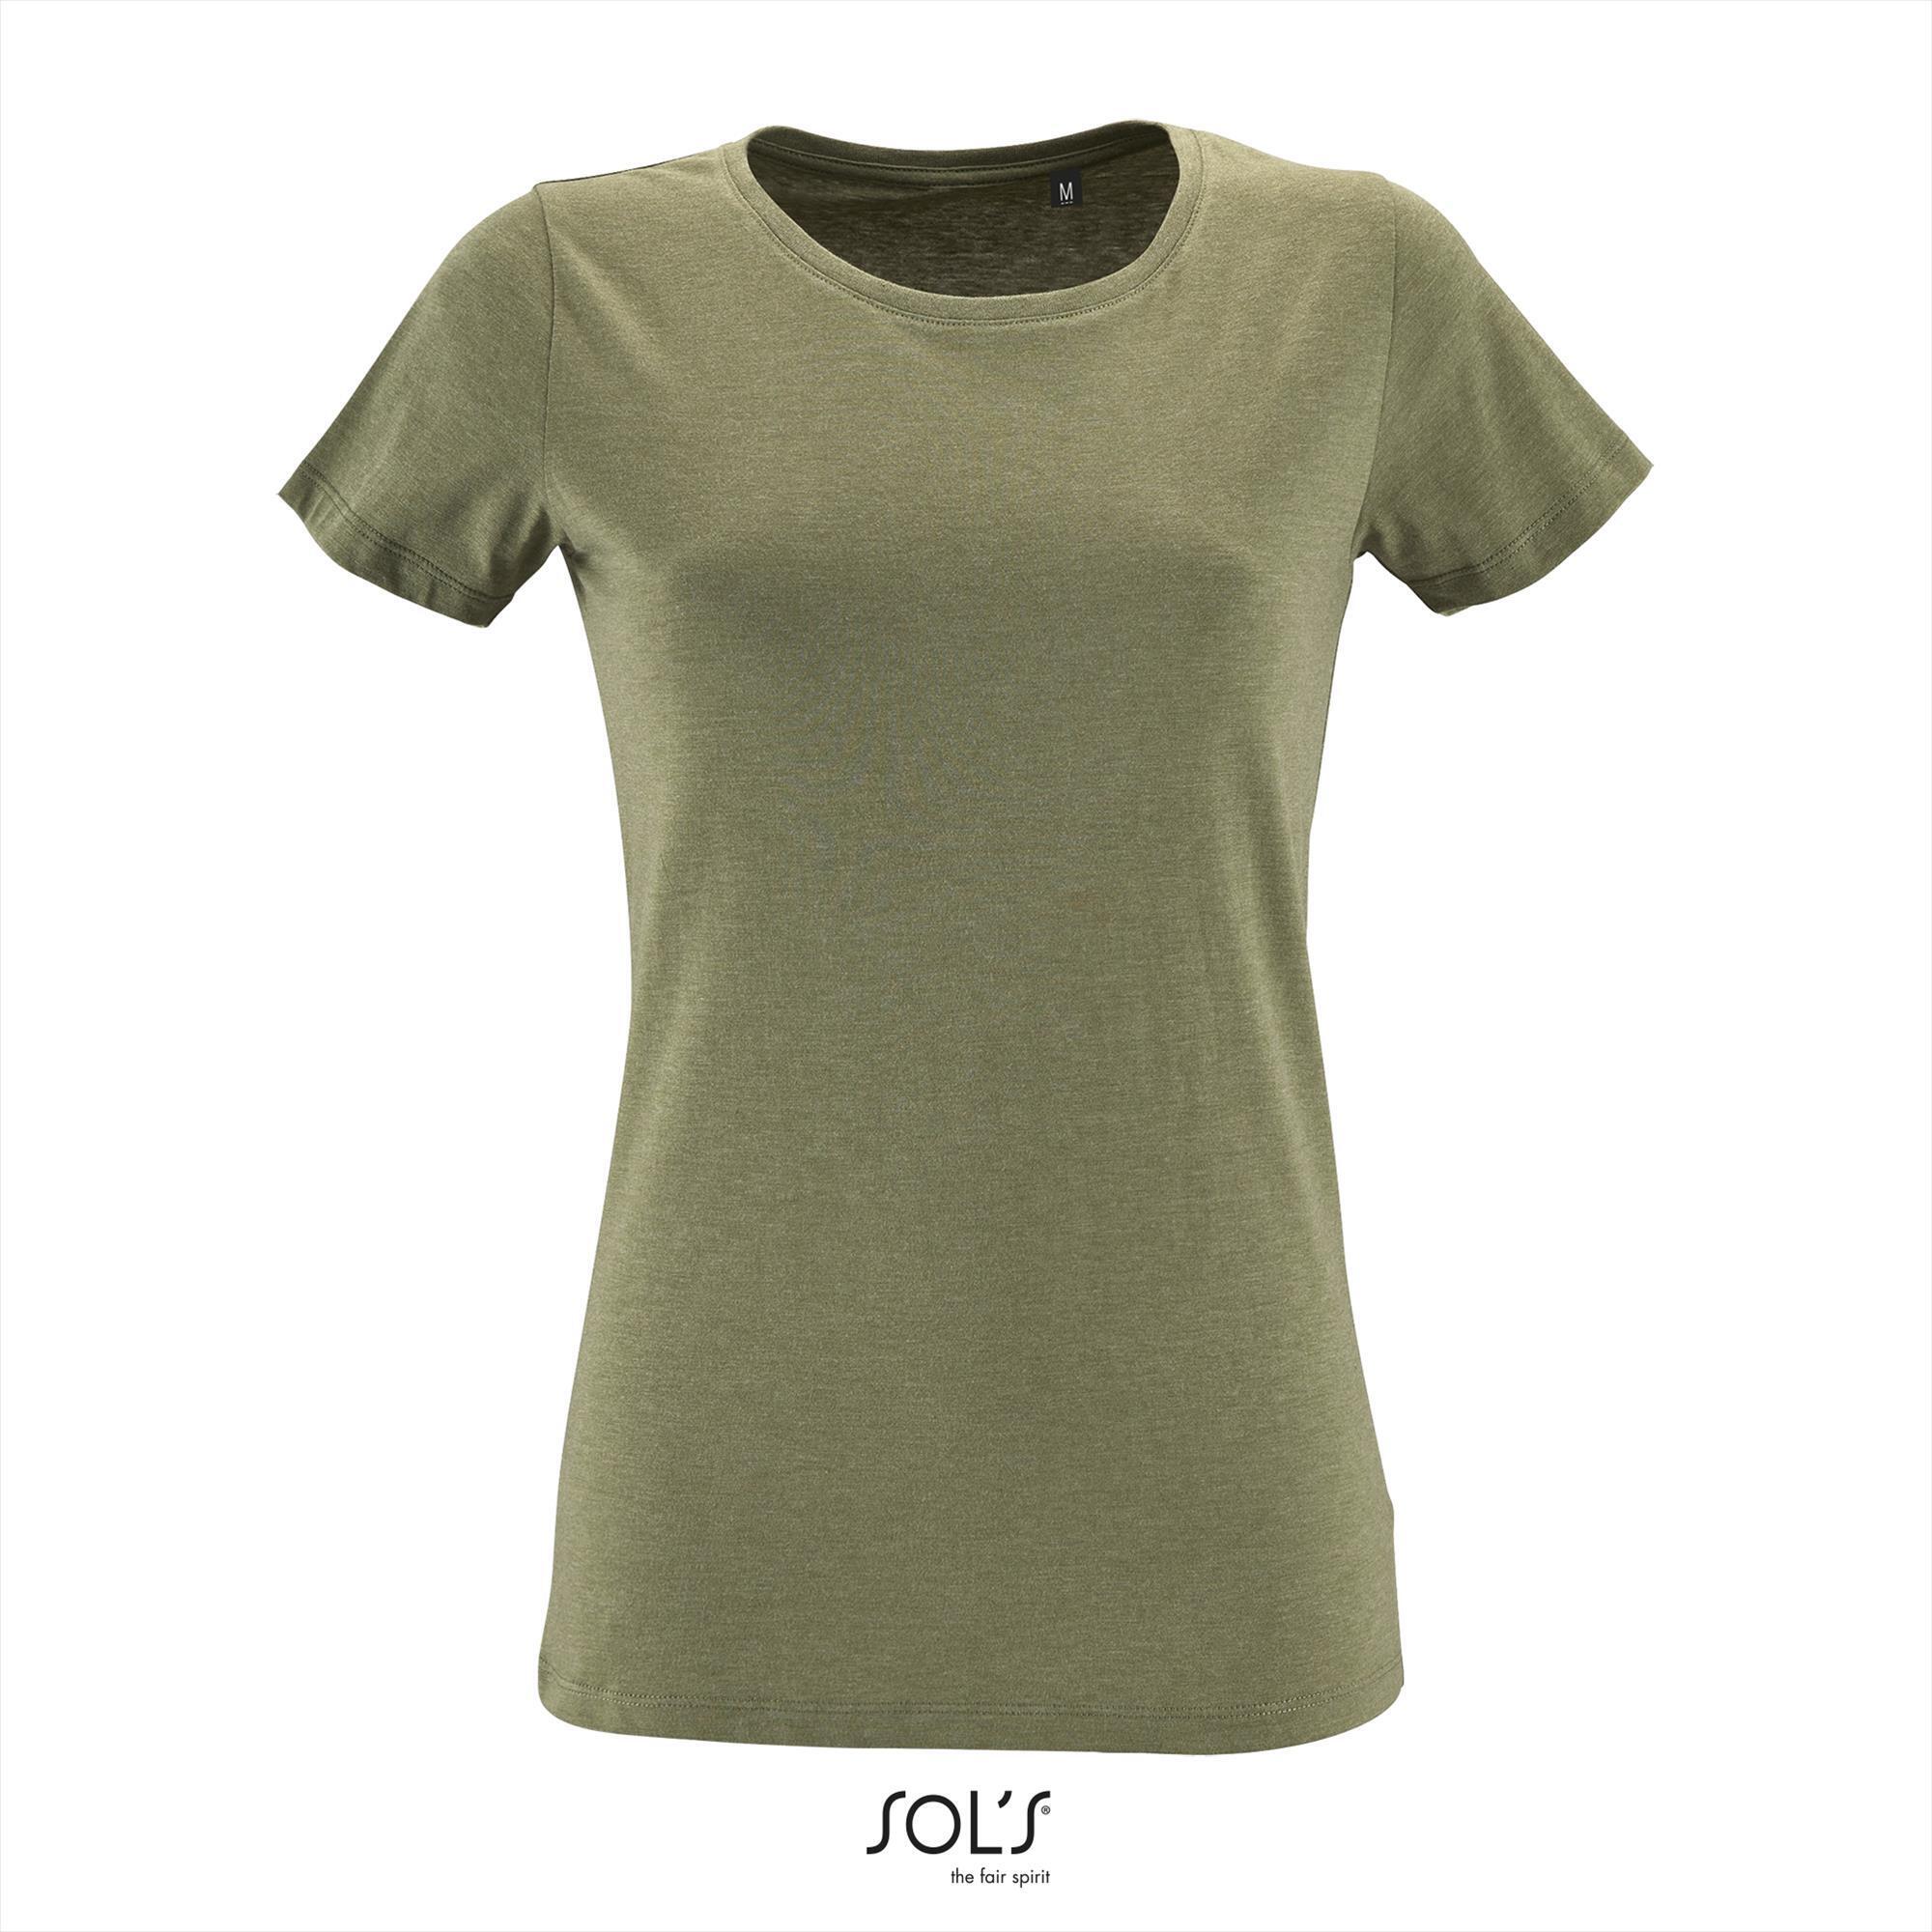 T-shirt Dames heather khaki fitted met ronde hals